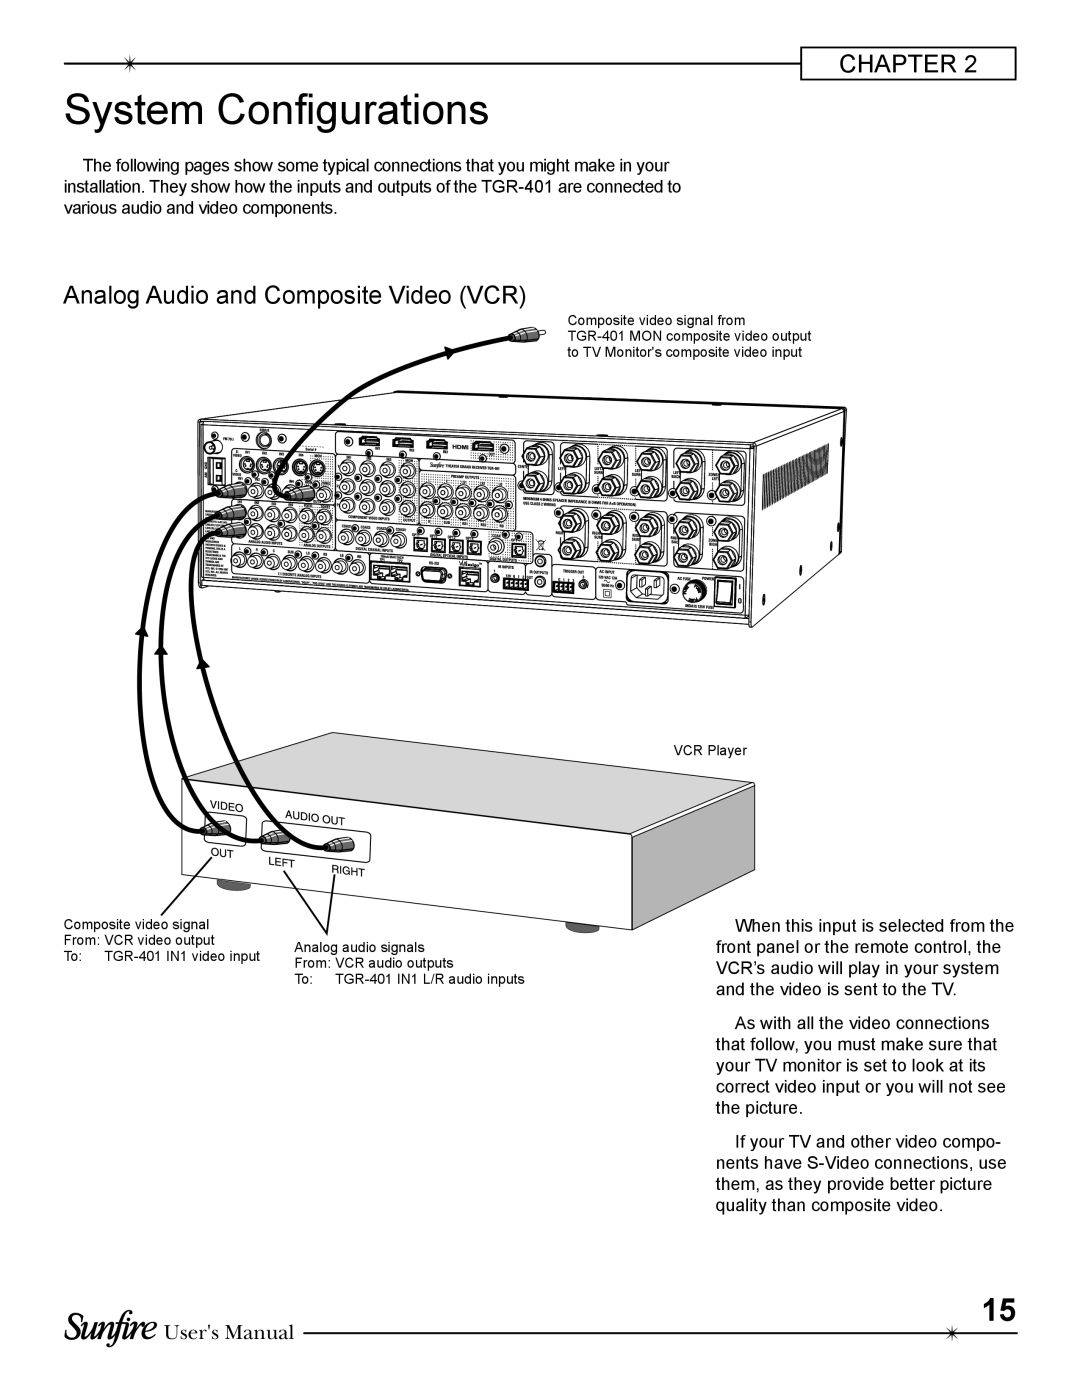 Sunfire TGR-401-230 manual System Configurations, Chapter, Analog Audio and Composite Video VCR, Users Manual 